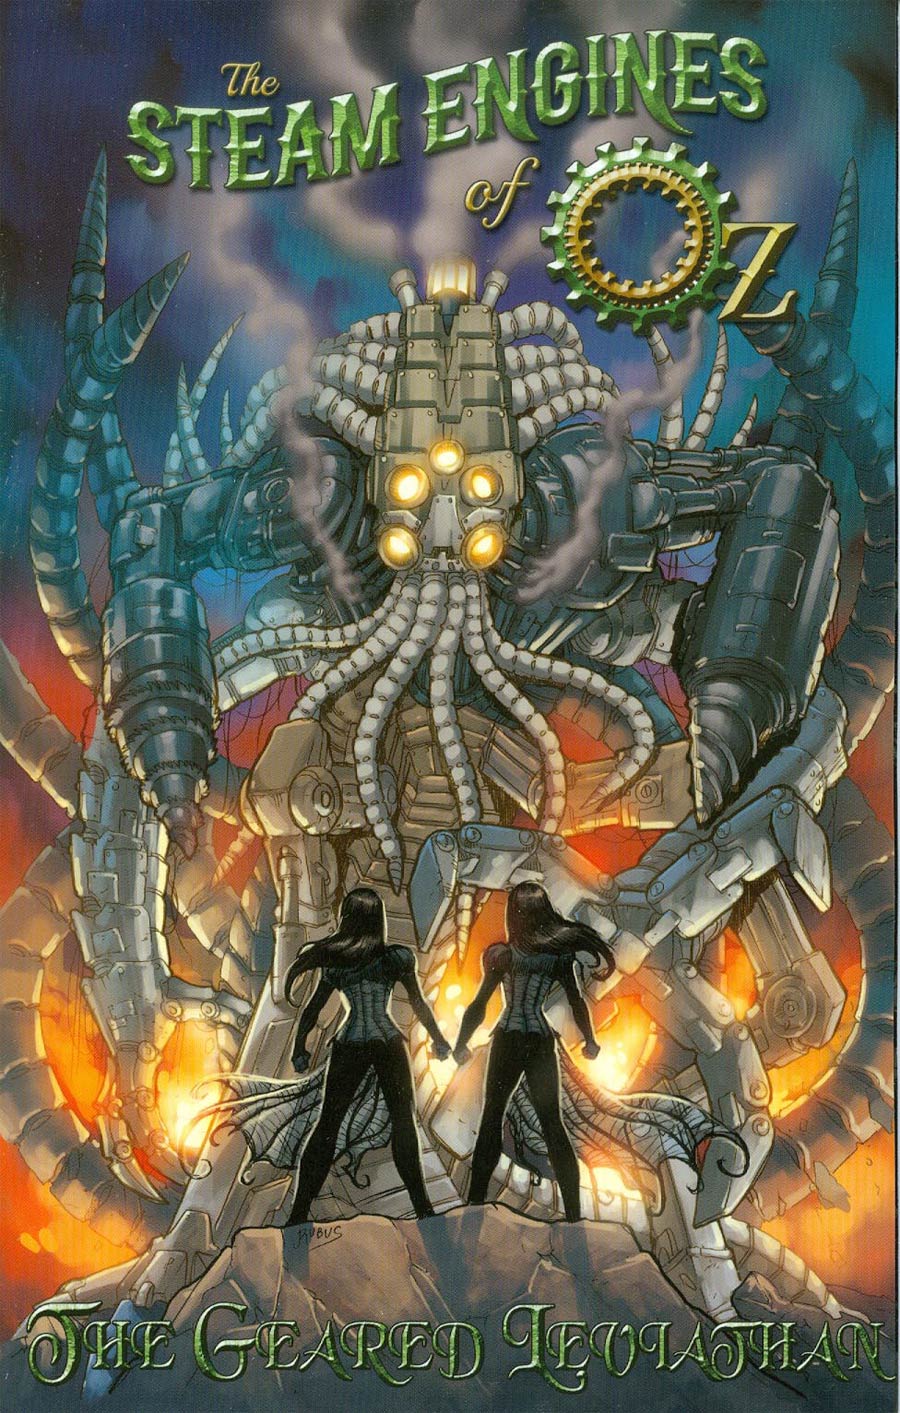 Steam Engines Of Oz Vol 2 Geared Leviathan TP